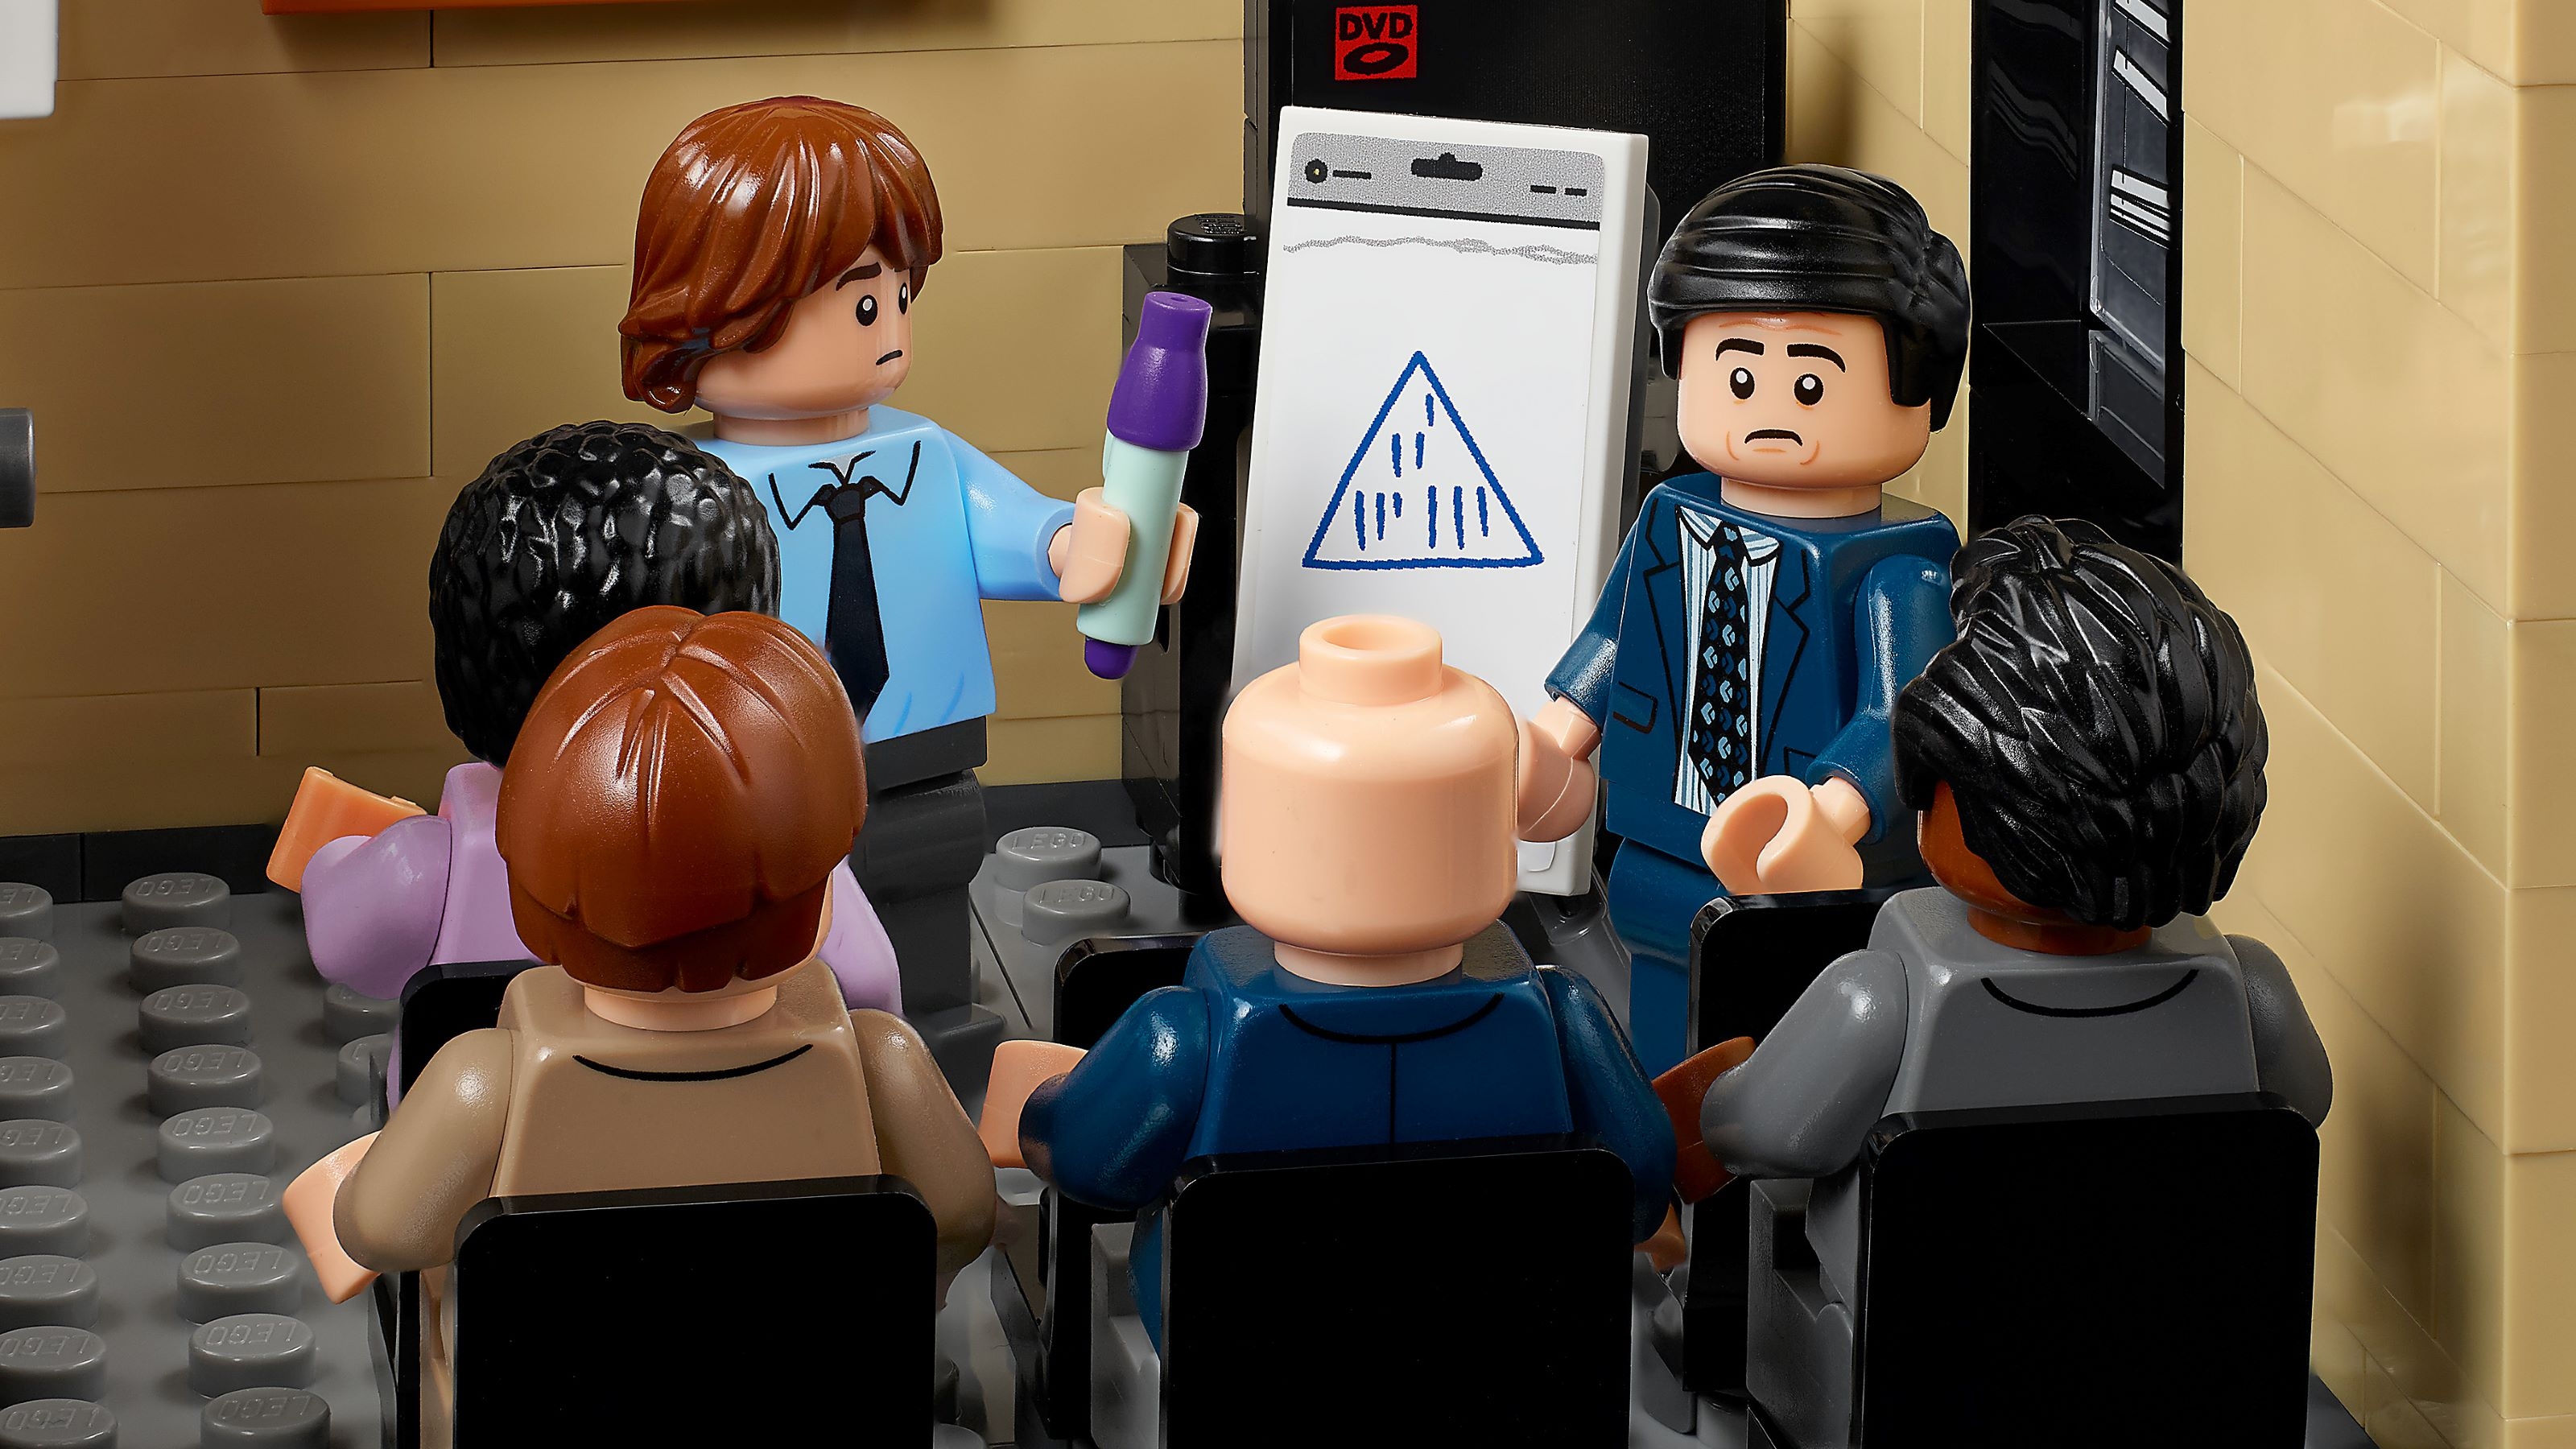 The Office 21336 | Ideas | Buy online at the Official LEGO® Shop GB